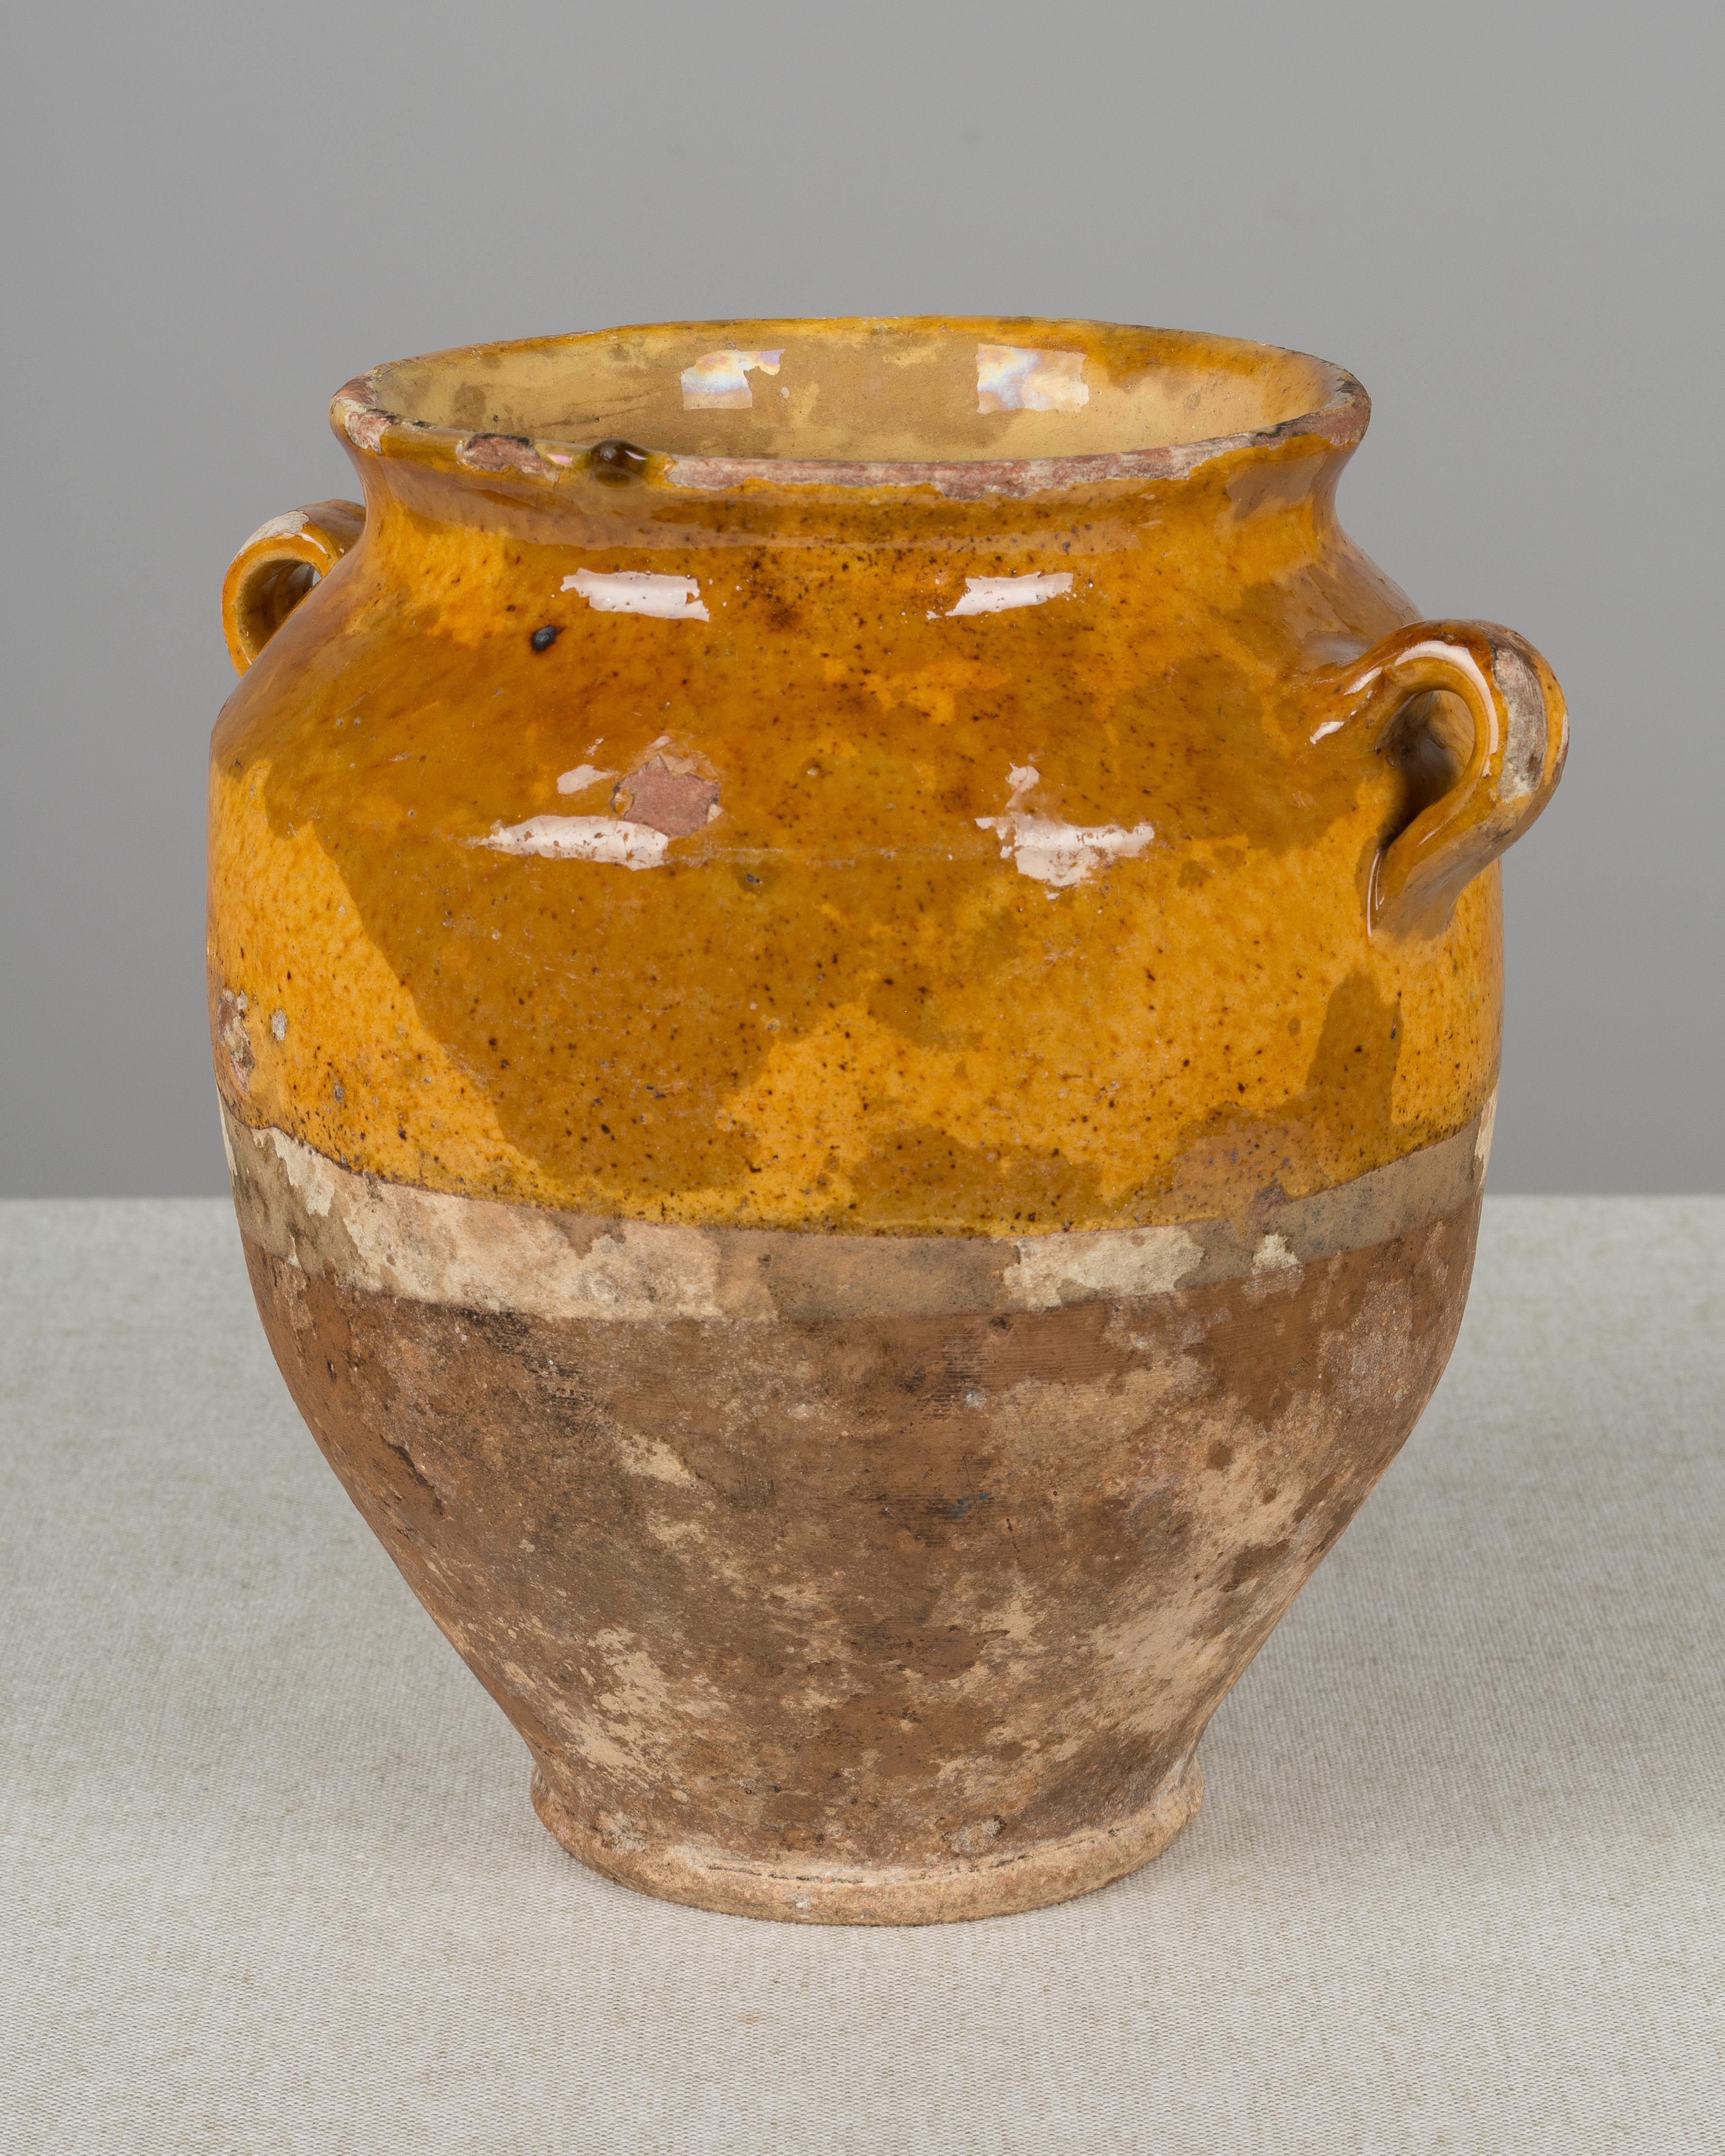 An earthenware confit pot from the Southwest of France with traditional ochre glaze. Beautiful patina and deep color. Some losses to glaze. These ordinary earthenware vessels were once used daily in the French country home and have beautiful rustic